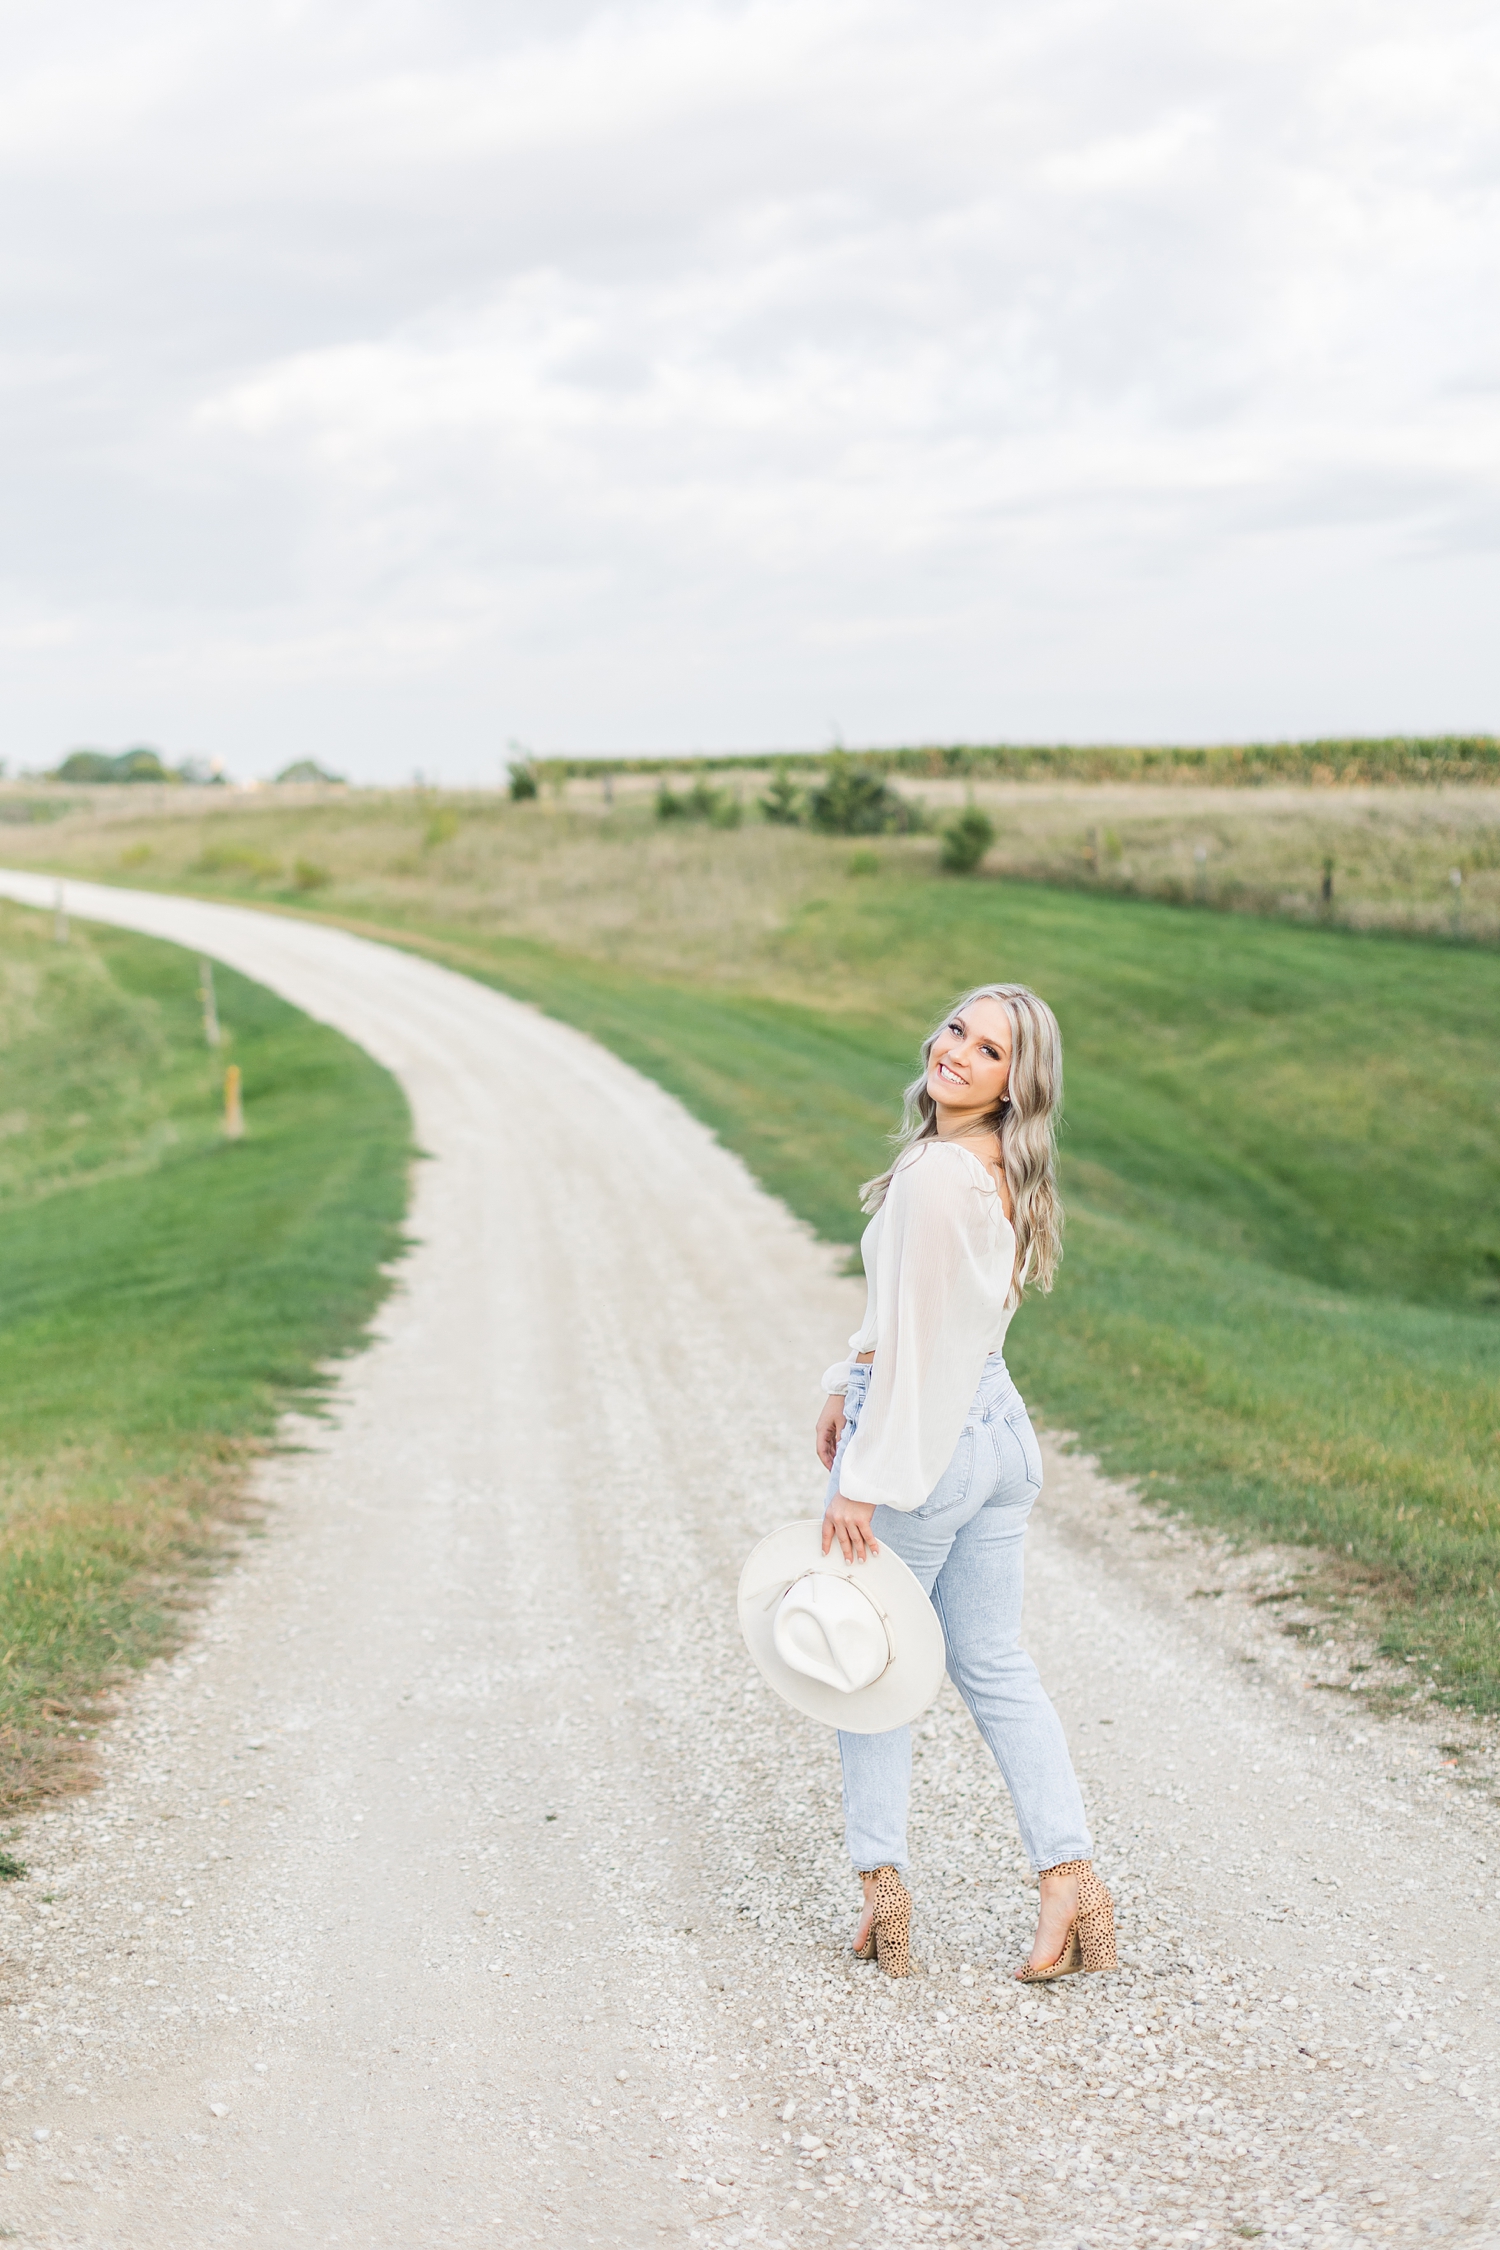 Shelby looks back and smiles while walking down a gravel road | CB Studio